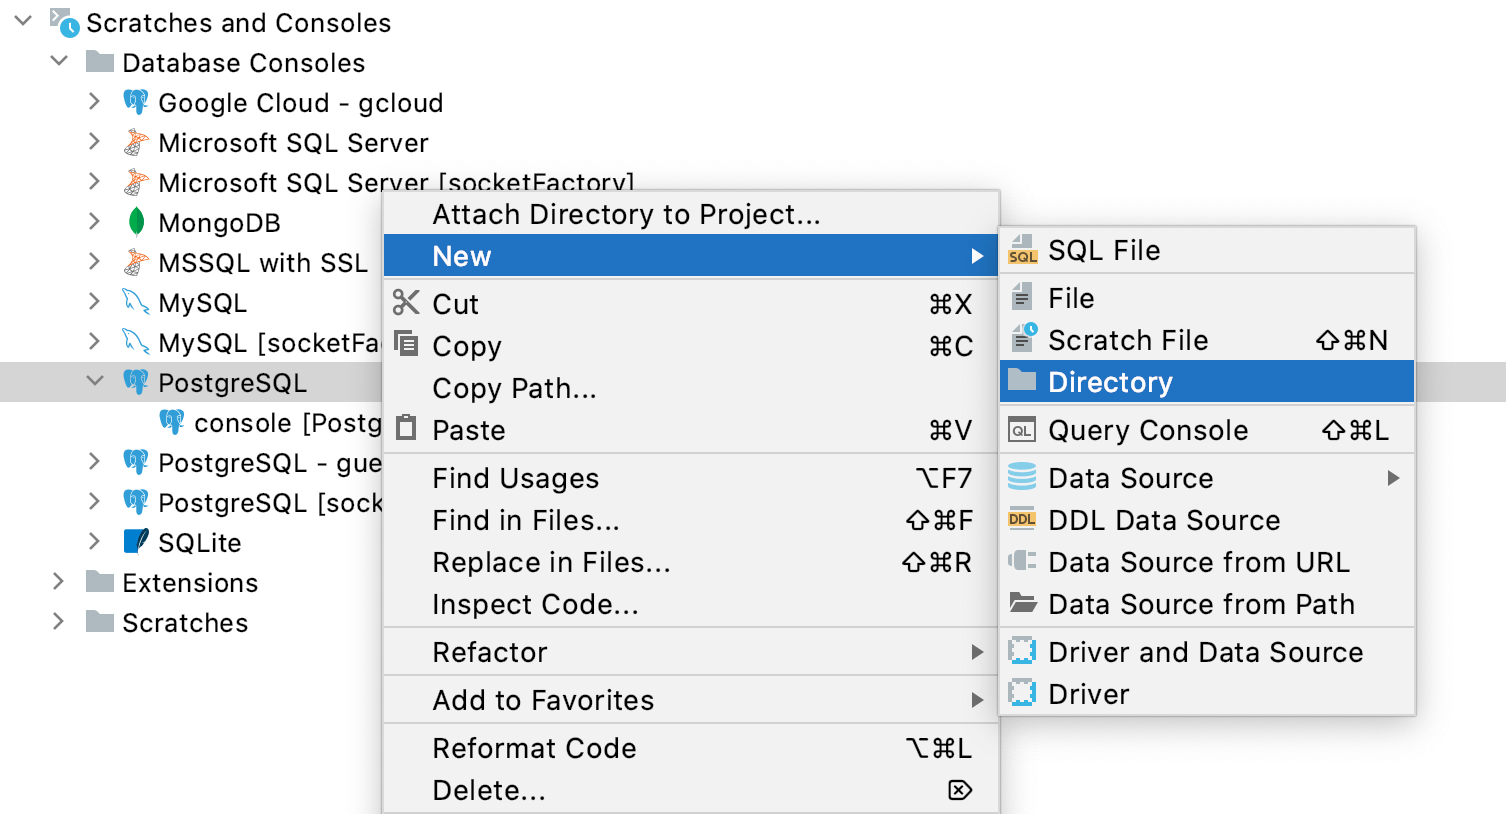 Group consoles under the data source directory